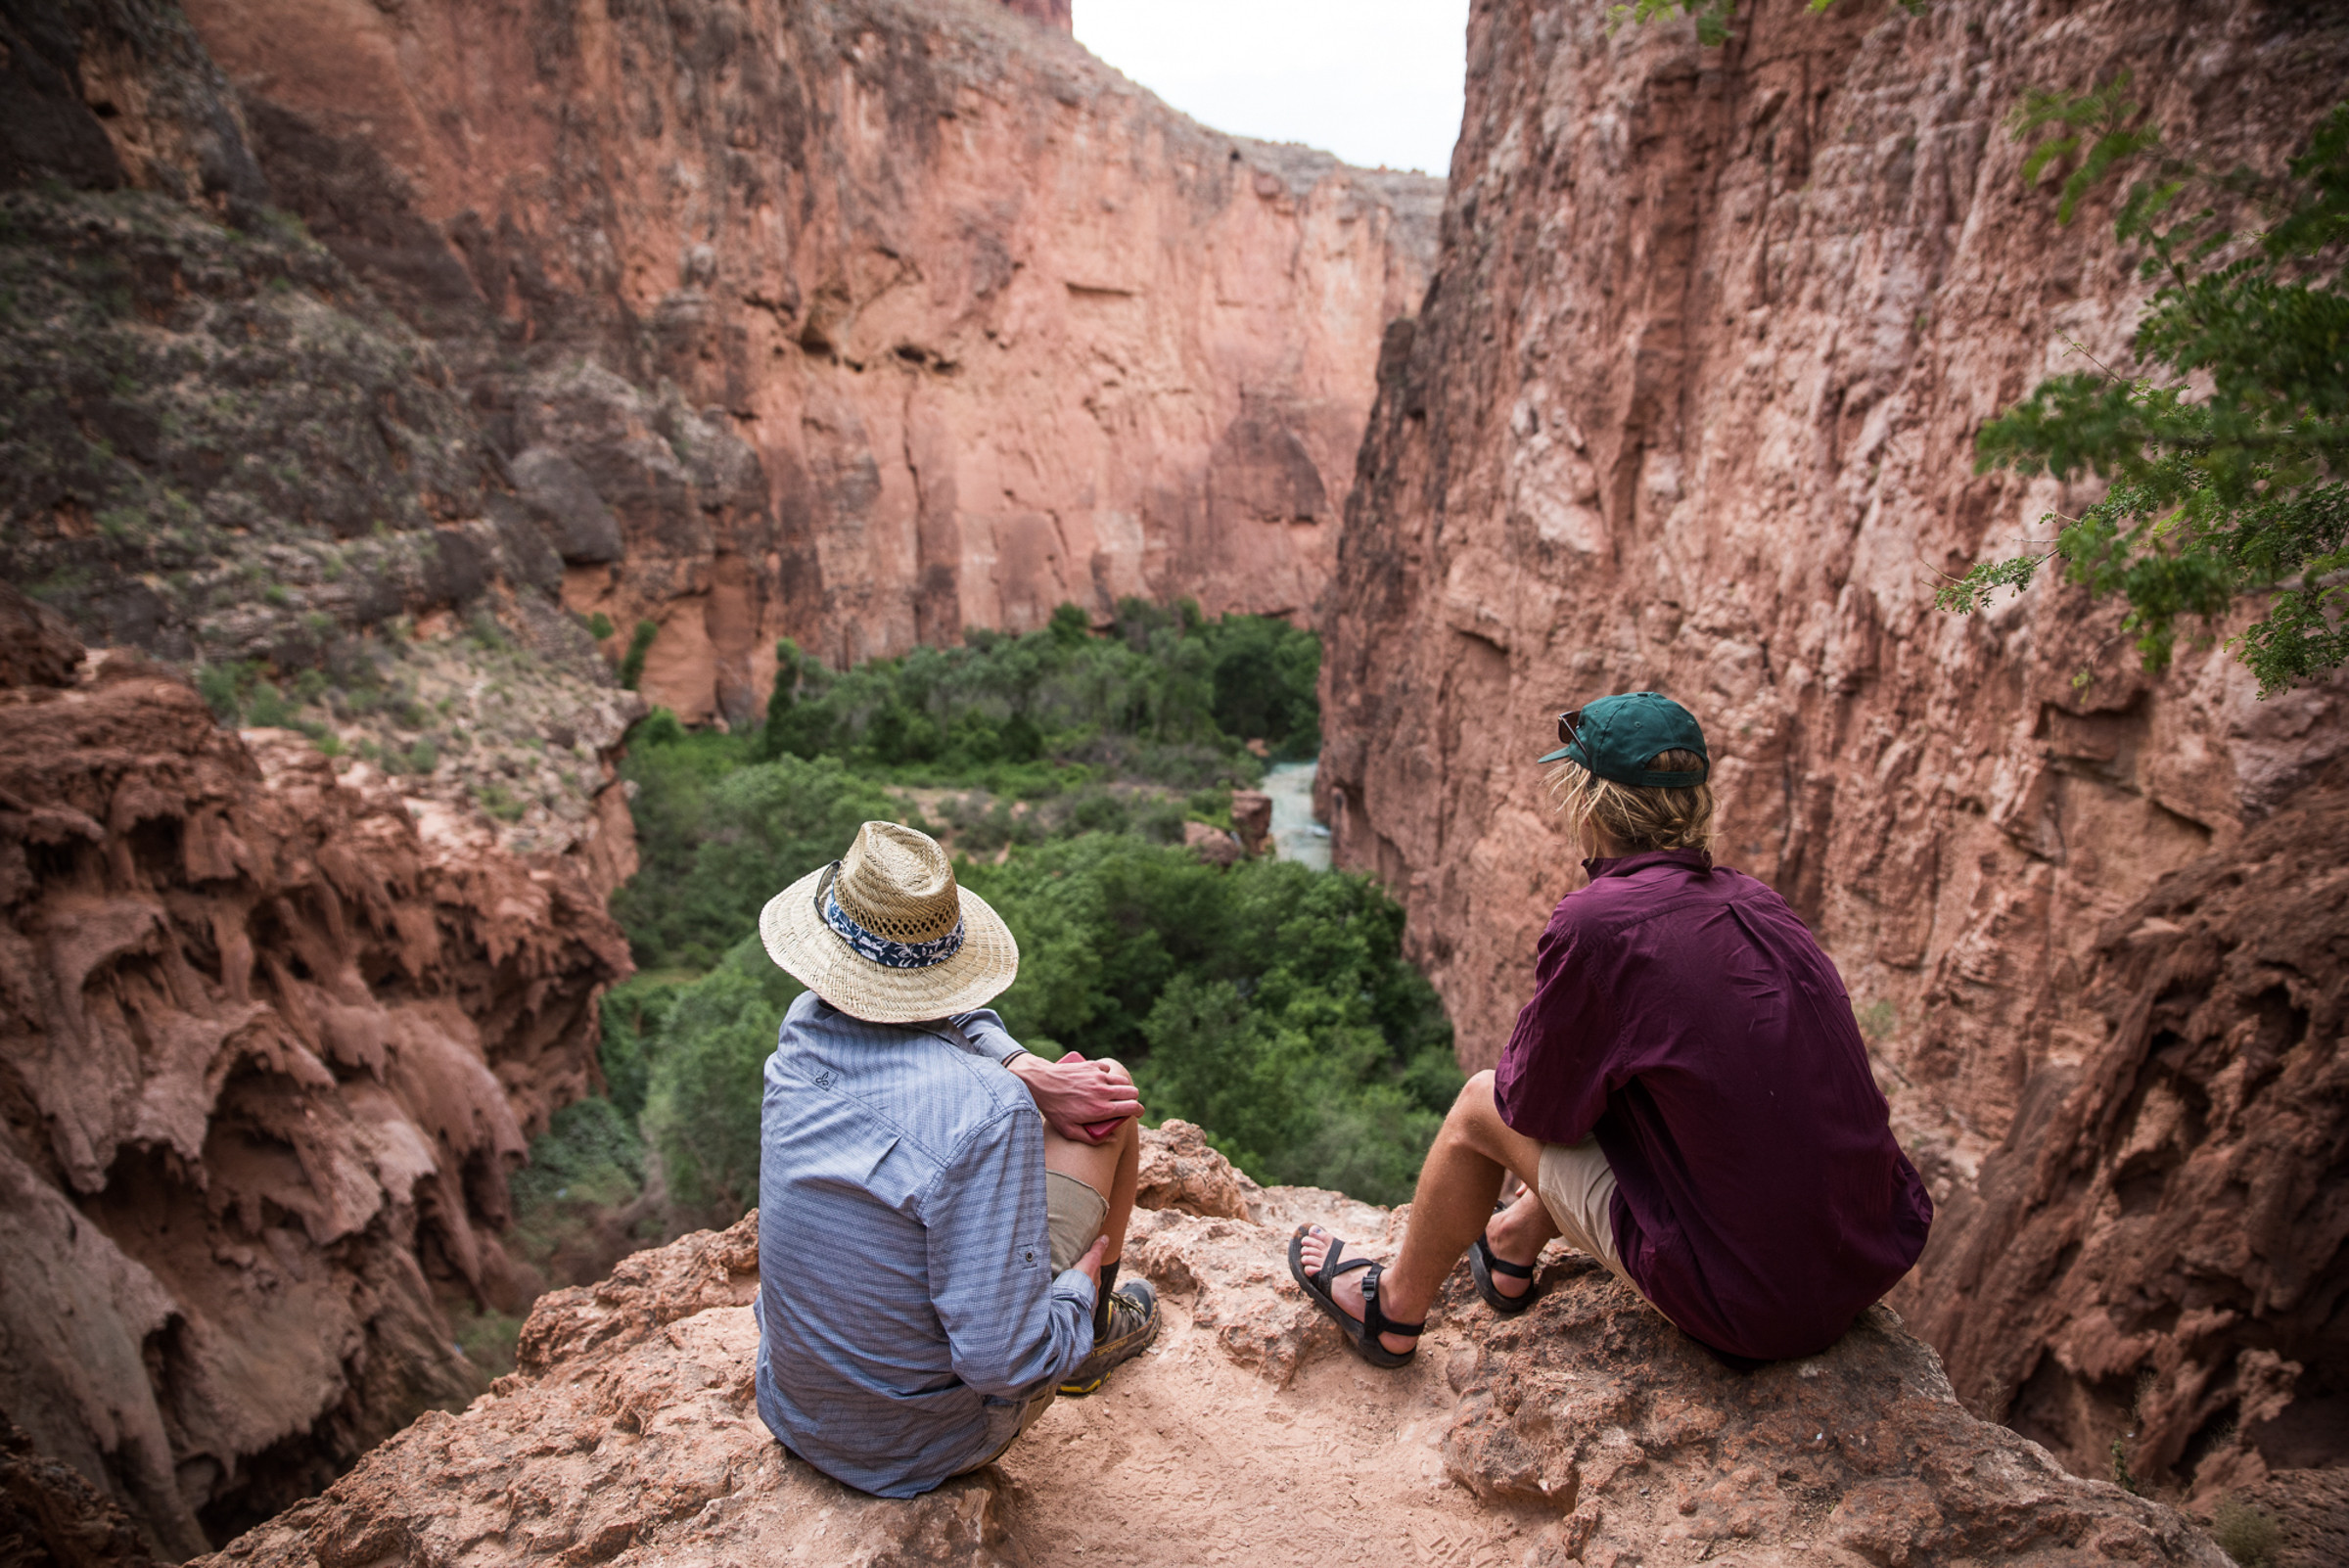 Two students sitting on a cliff, looking out towards vegetation of Havasu Falls below them.